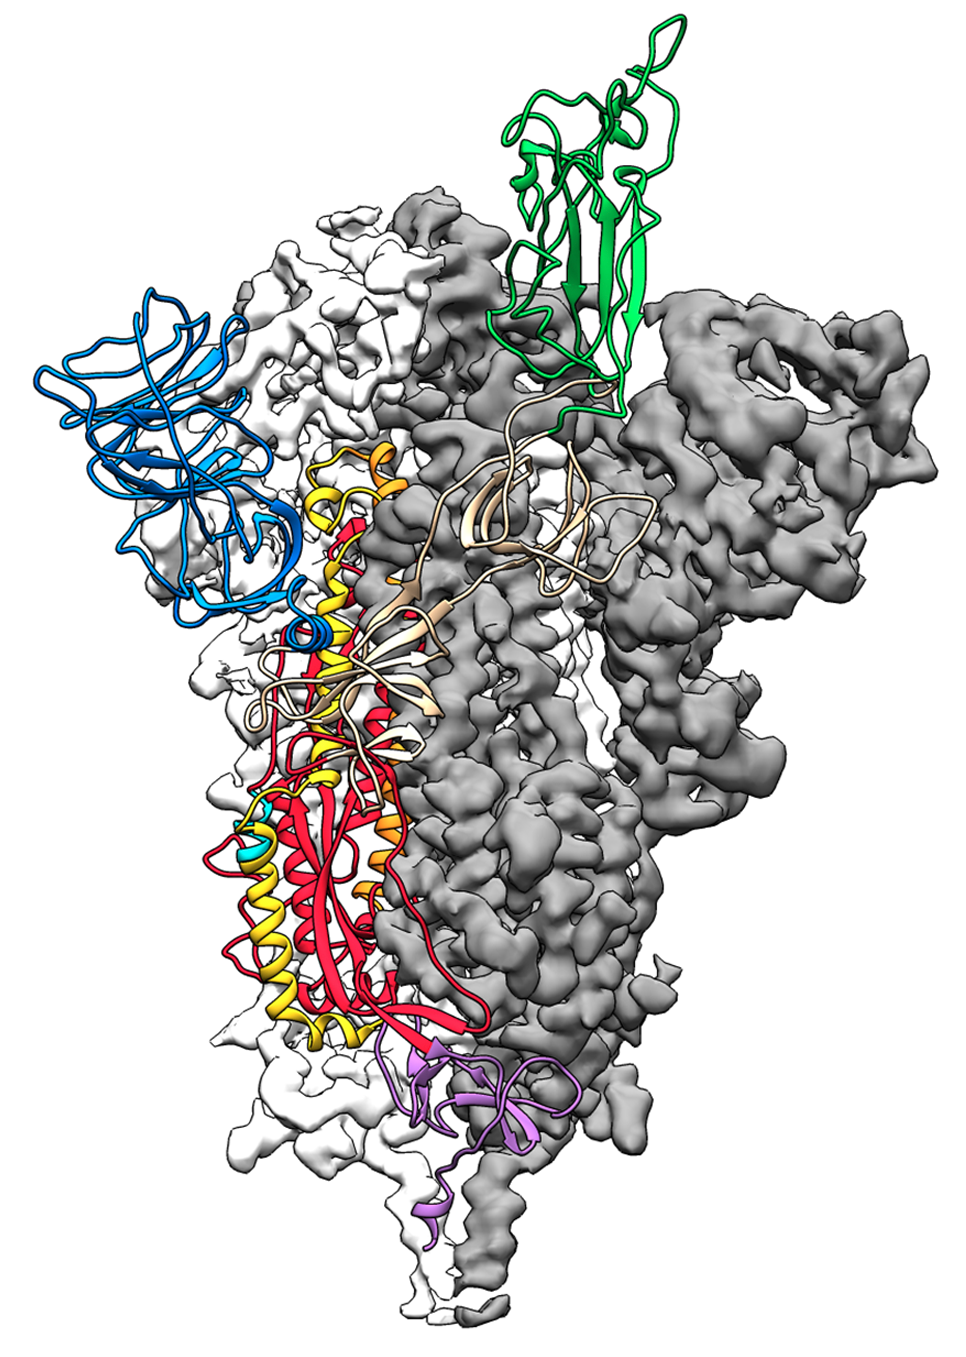 This molecular structure of the SARS-CoV-2 spike protein looks like a mushroom-shaped tangle of colored ribbons